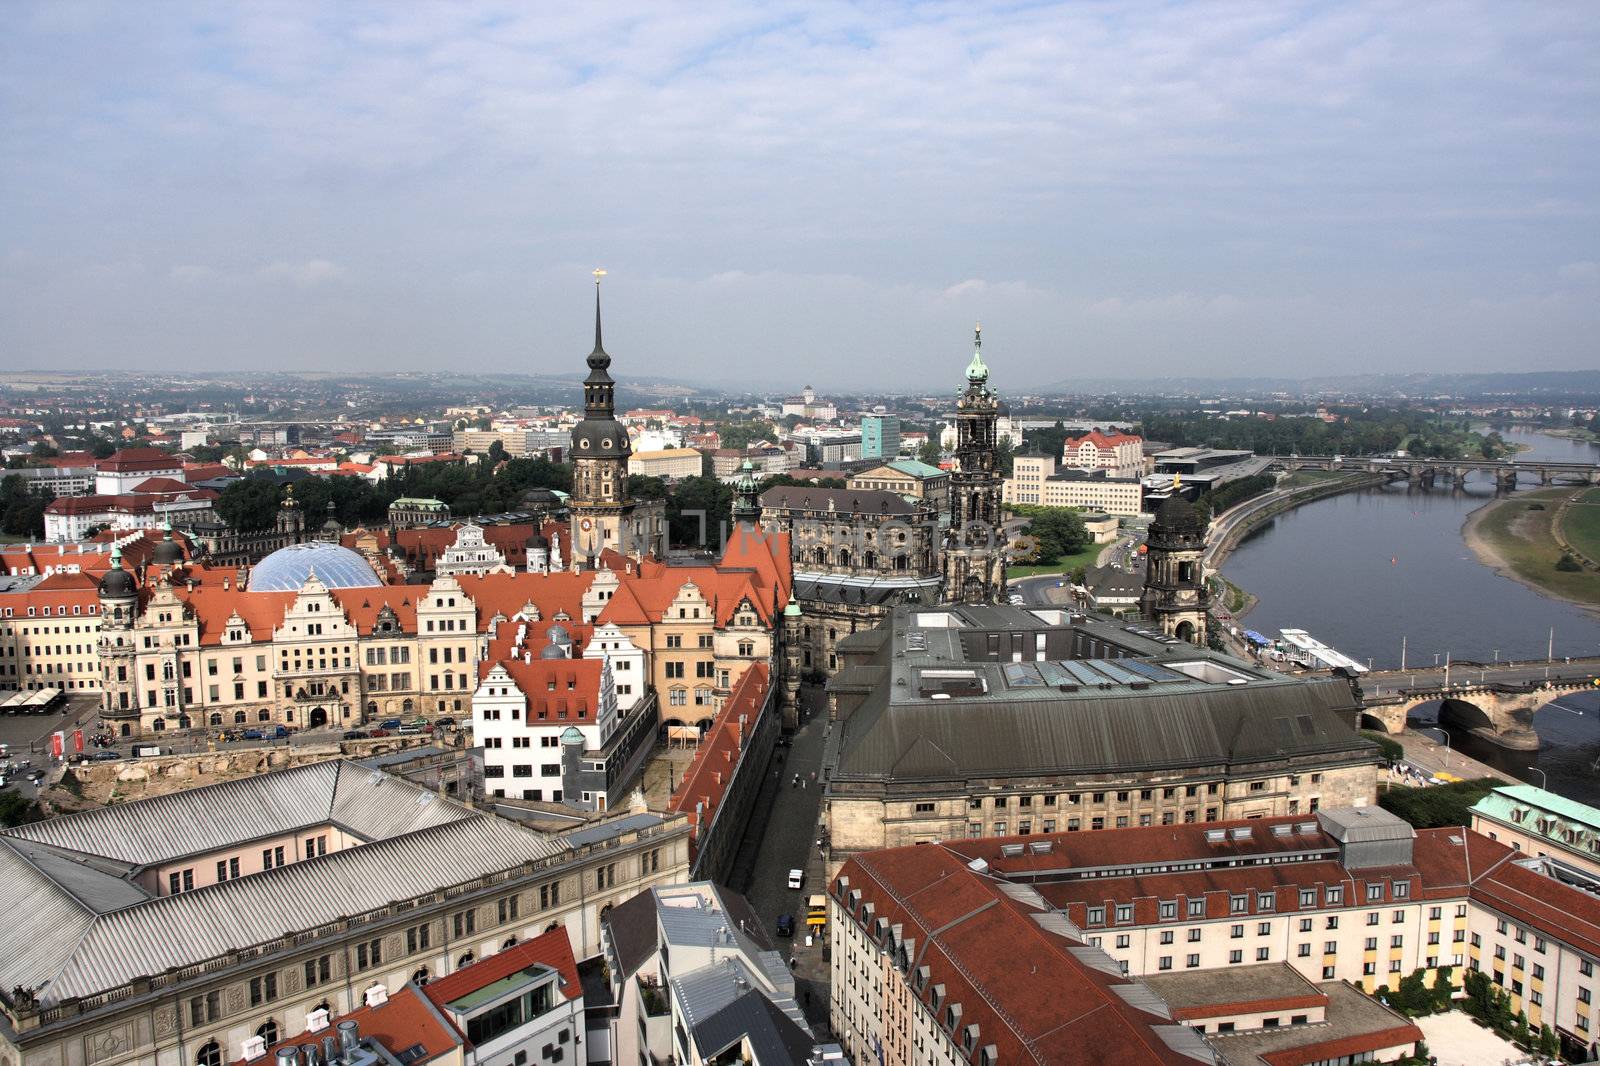 Beautiful cityscape of Dresden, Saxony, Germany. River Elbe, Hofkirche and other landmarks. View from Frauenkirche cathedral dome.